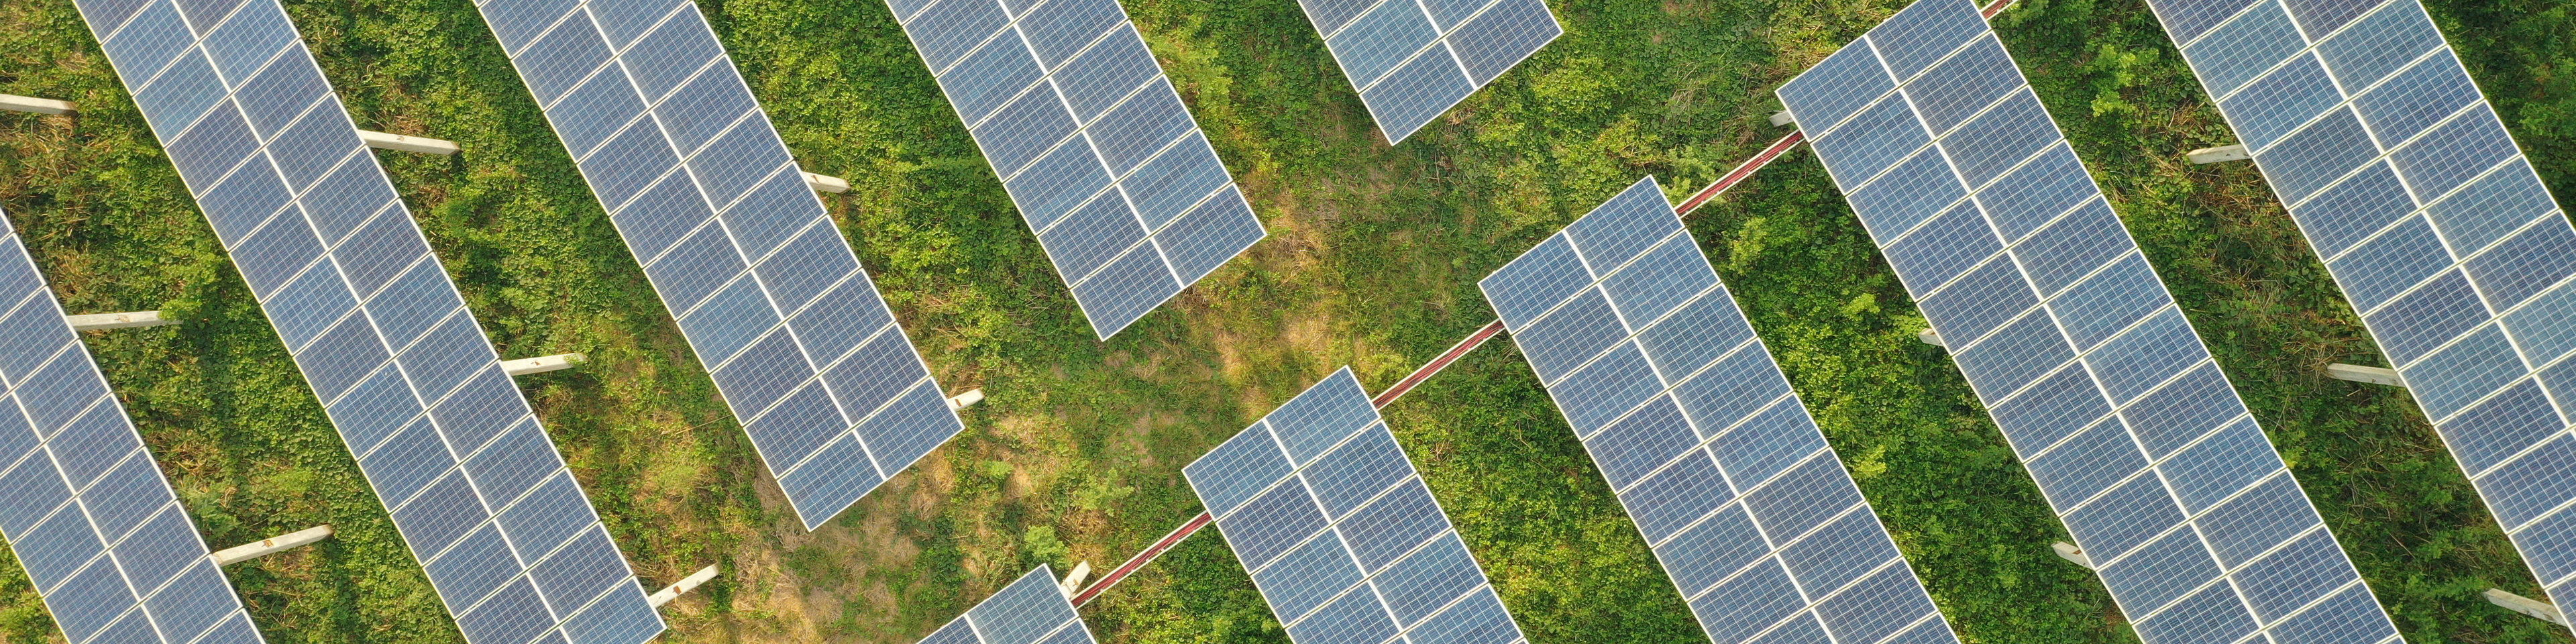 Solar panels stationary rows, solar power stations in high angle view isolated over green grass fields background / Solar panels stationary rows isolated over green grass fields background